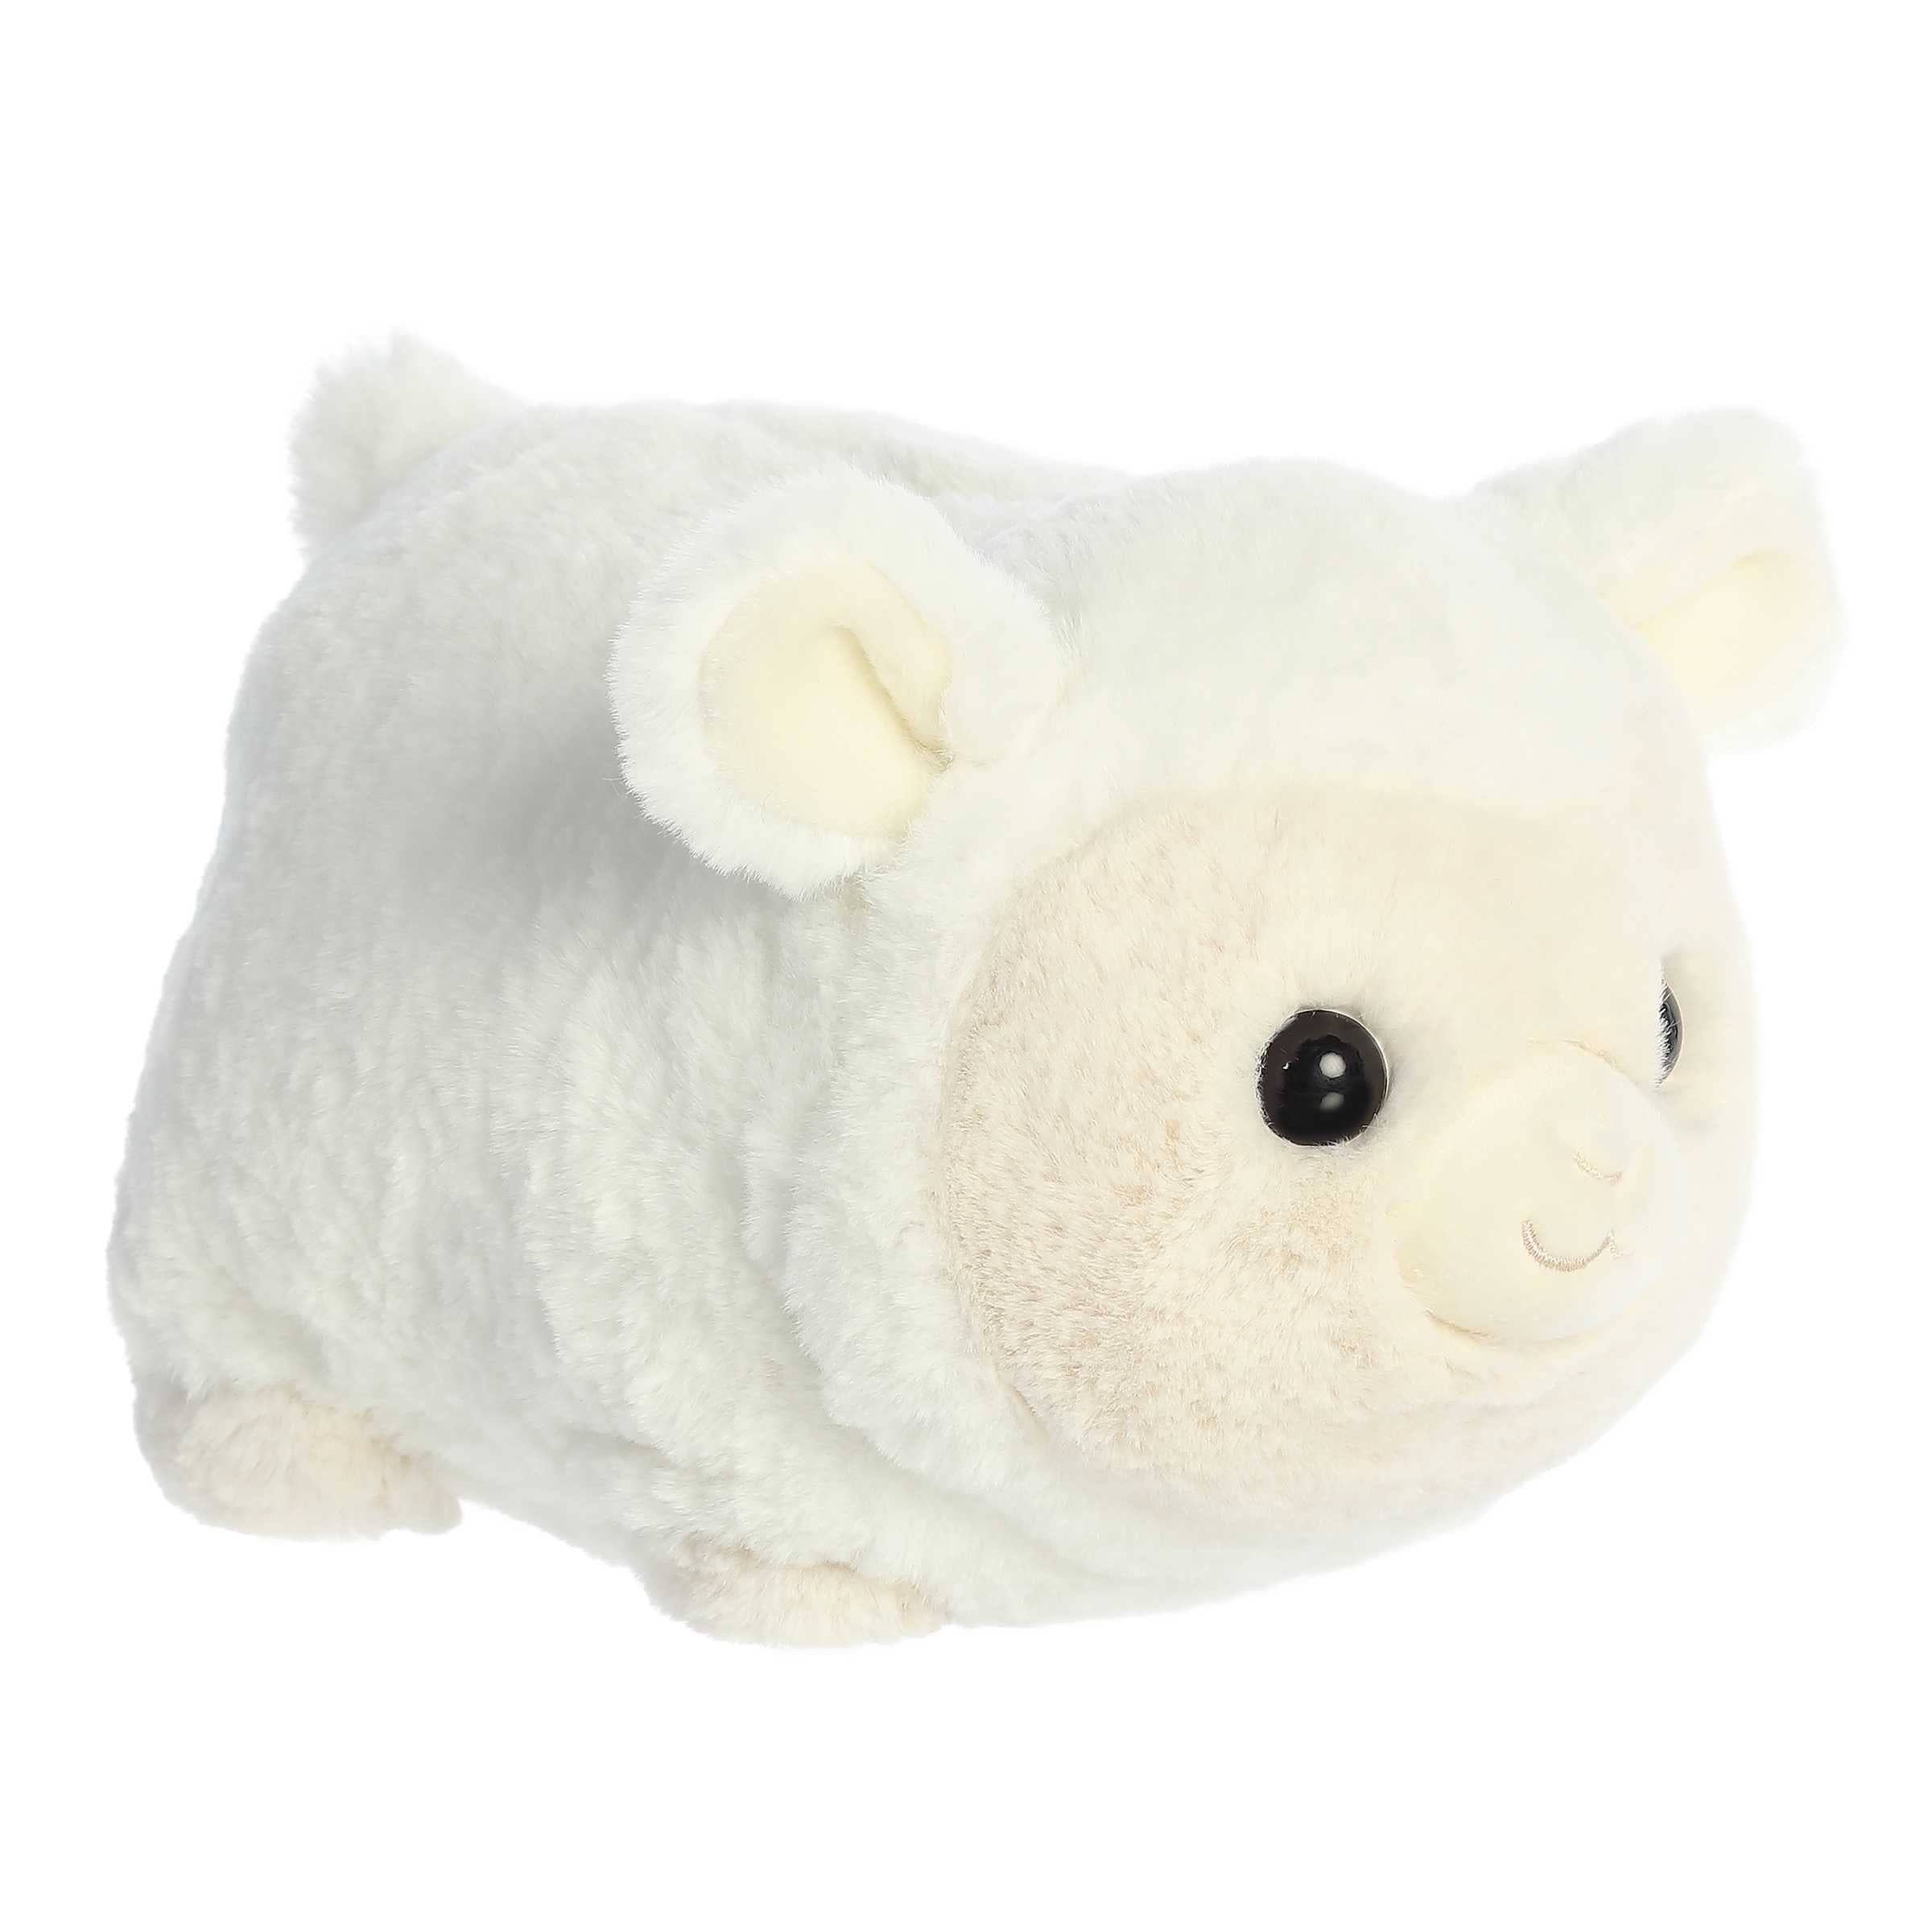 Sharla Sheep plush from the Spudsters Collection, featuring a unique potato shape and soft plush white coat